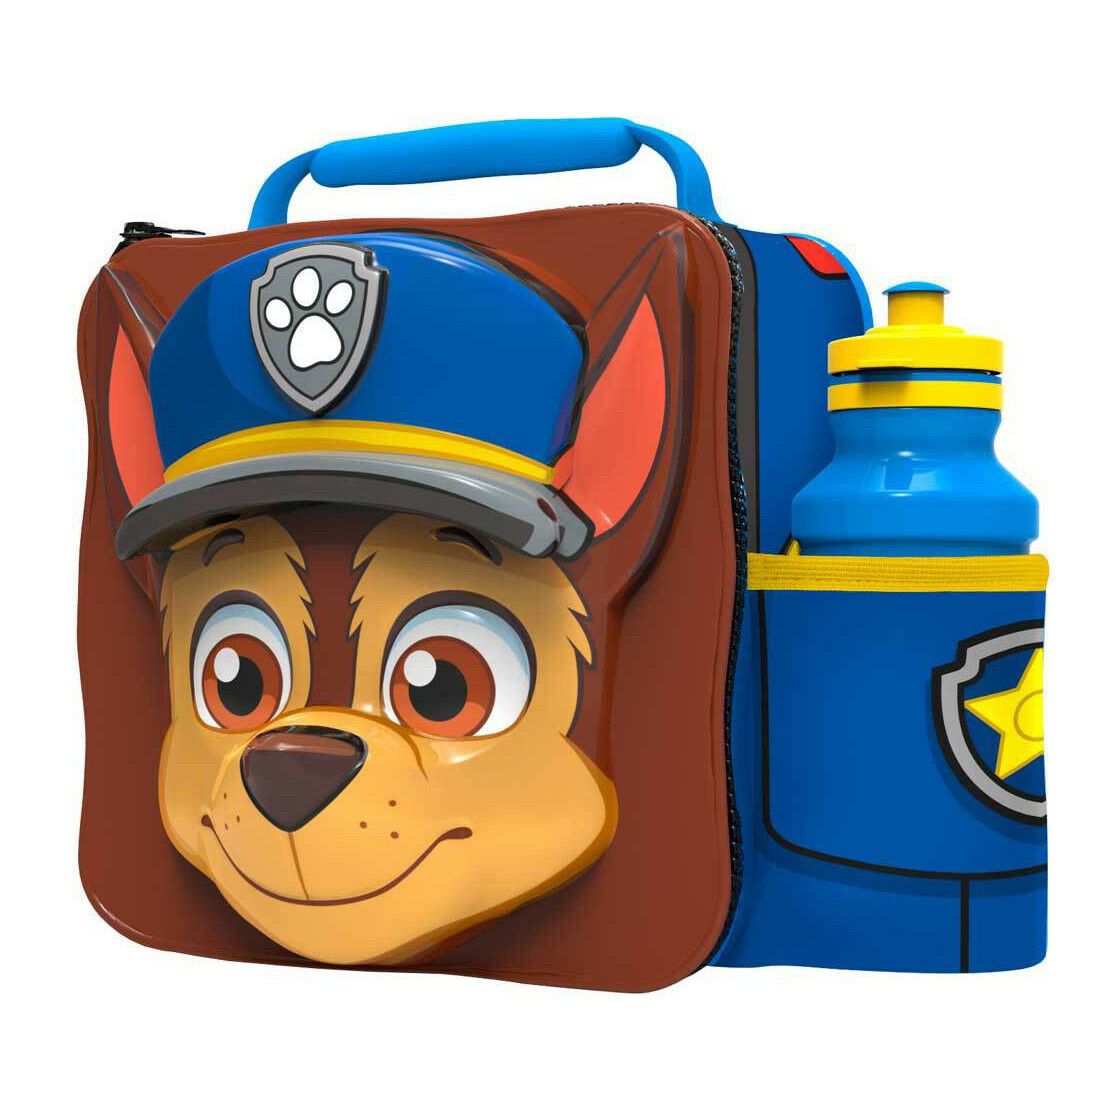 3D Paw Patrol Insulated Lunch Bag with Drink Bottle